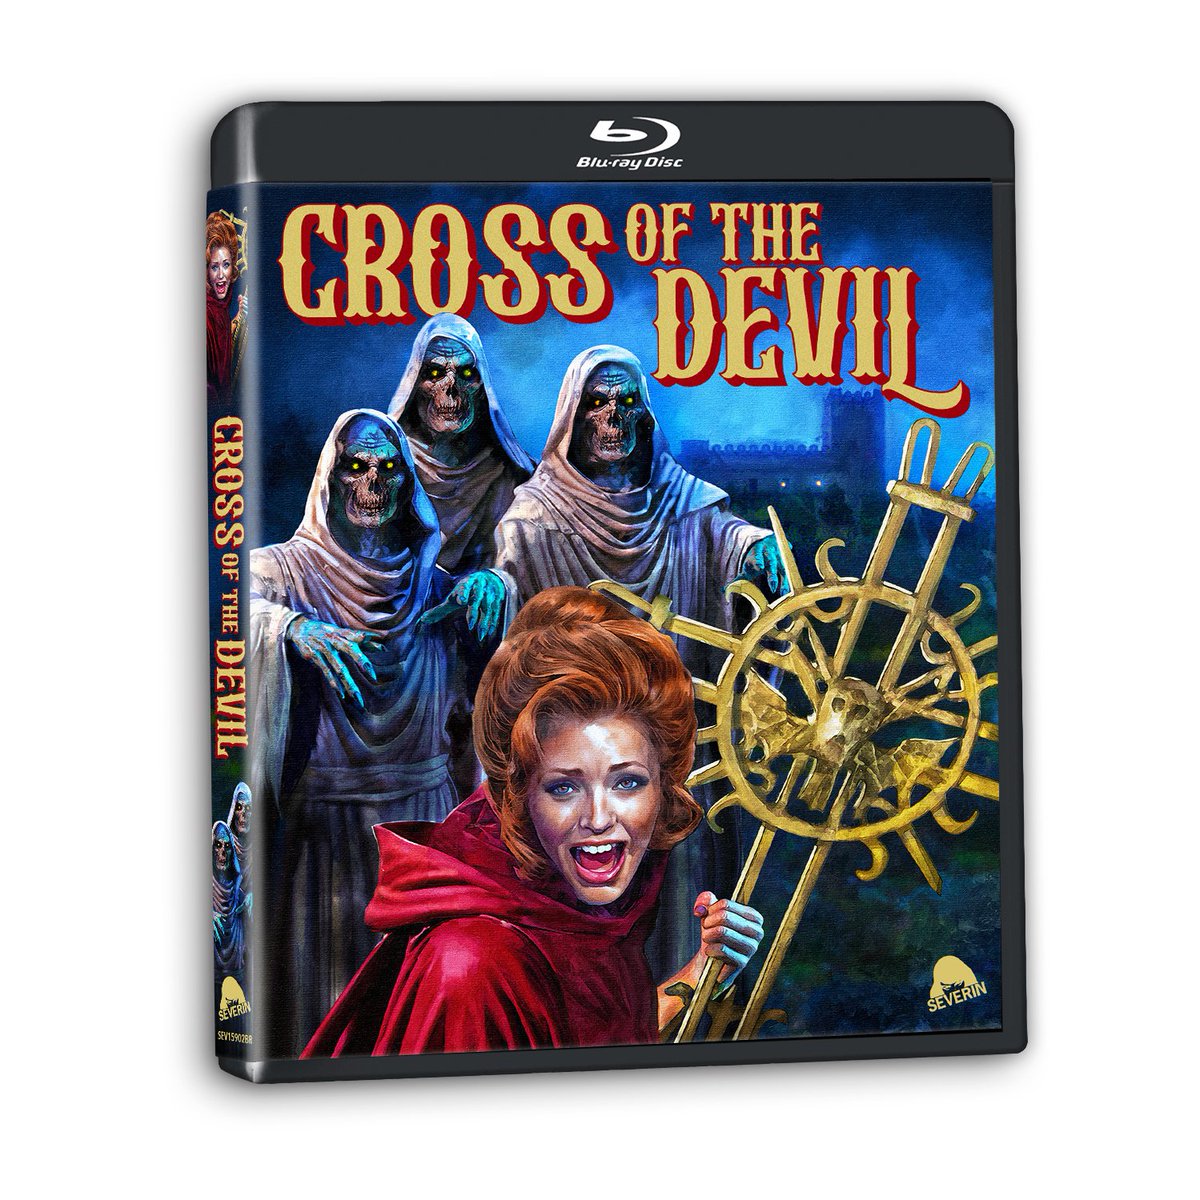 Hammer Films director John Gilling brings his inimitable style to the occult thriller in CROSS OF THE DEVIL.